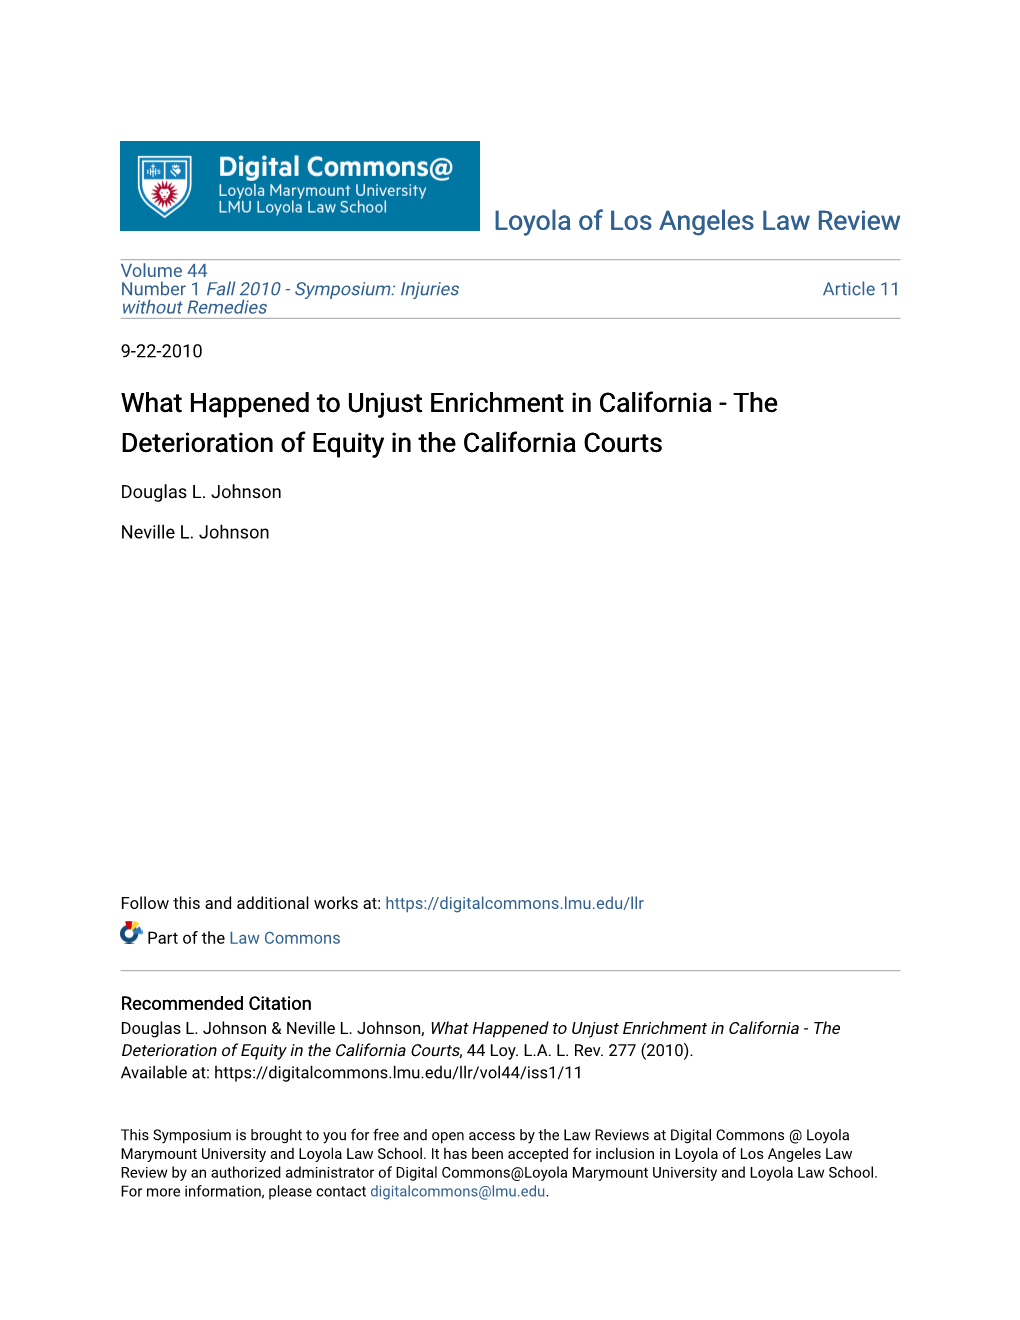 What Happened to Unjust Enrichment in California - the Deterioration of Equity in the California Courts